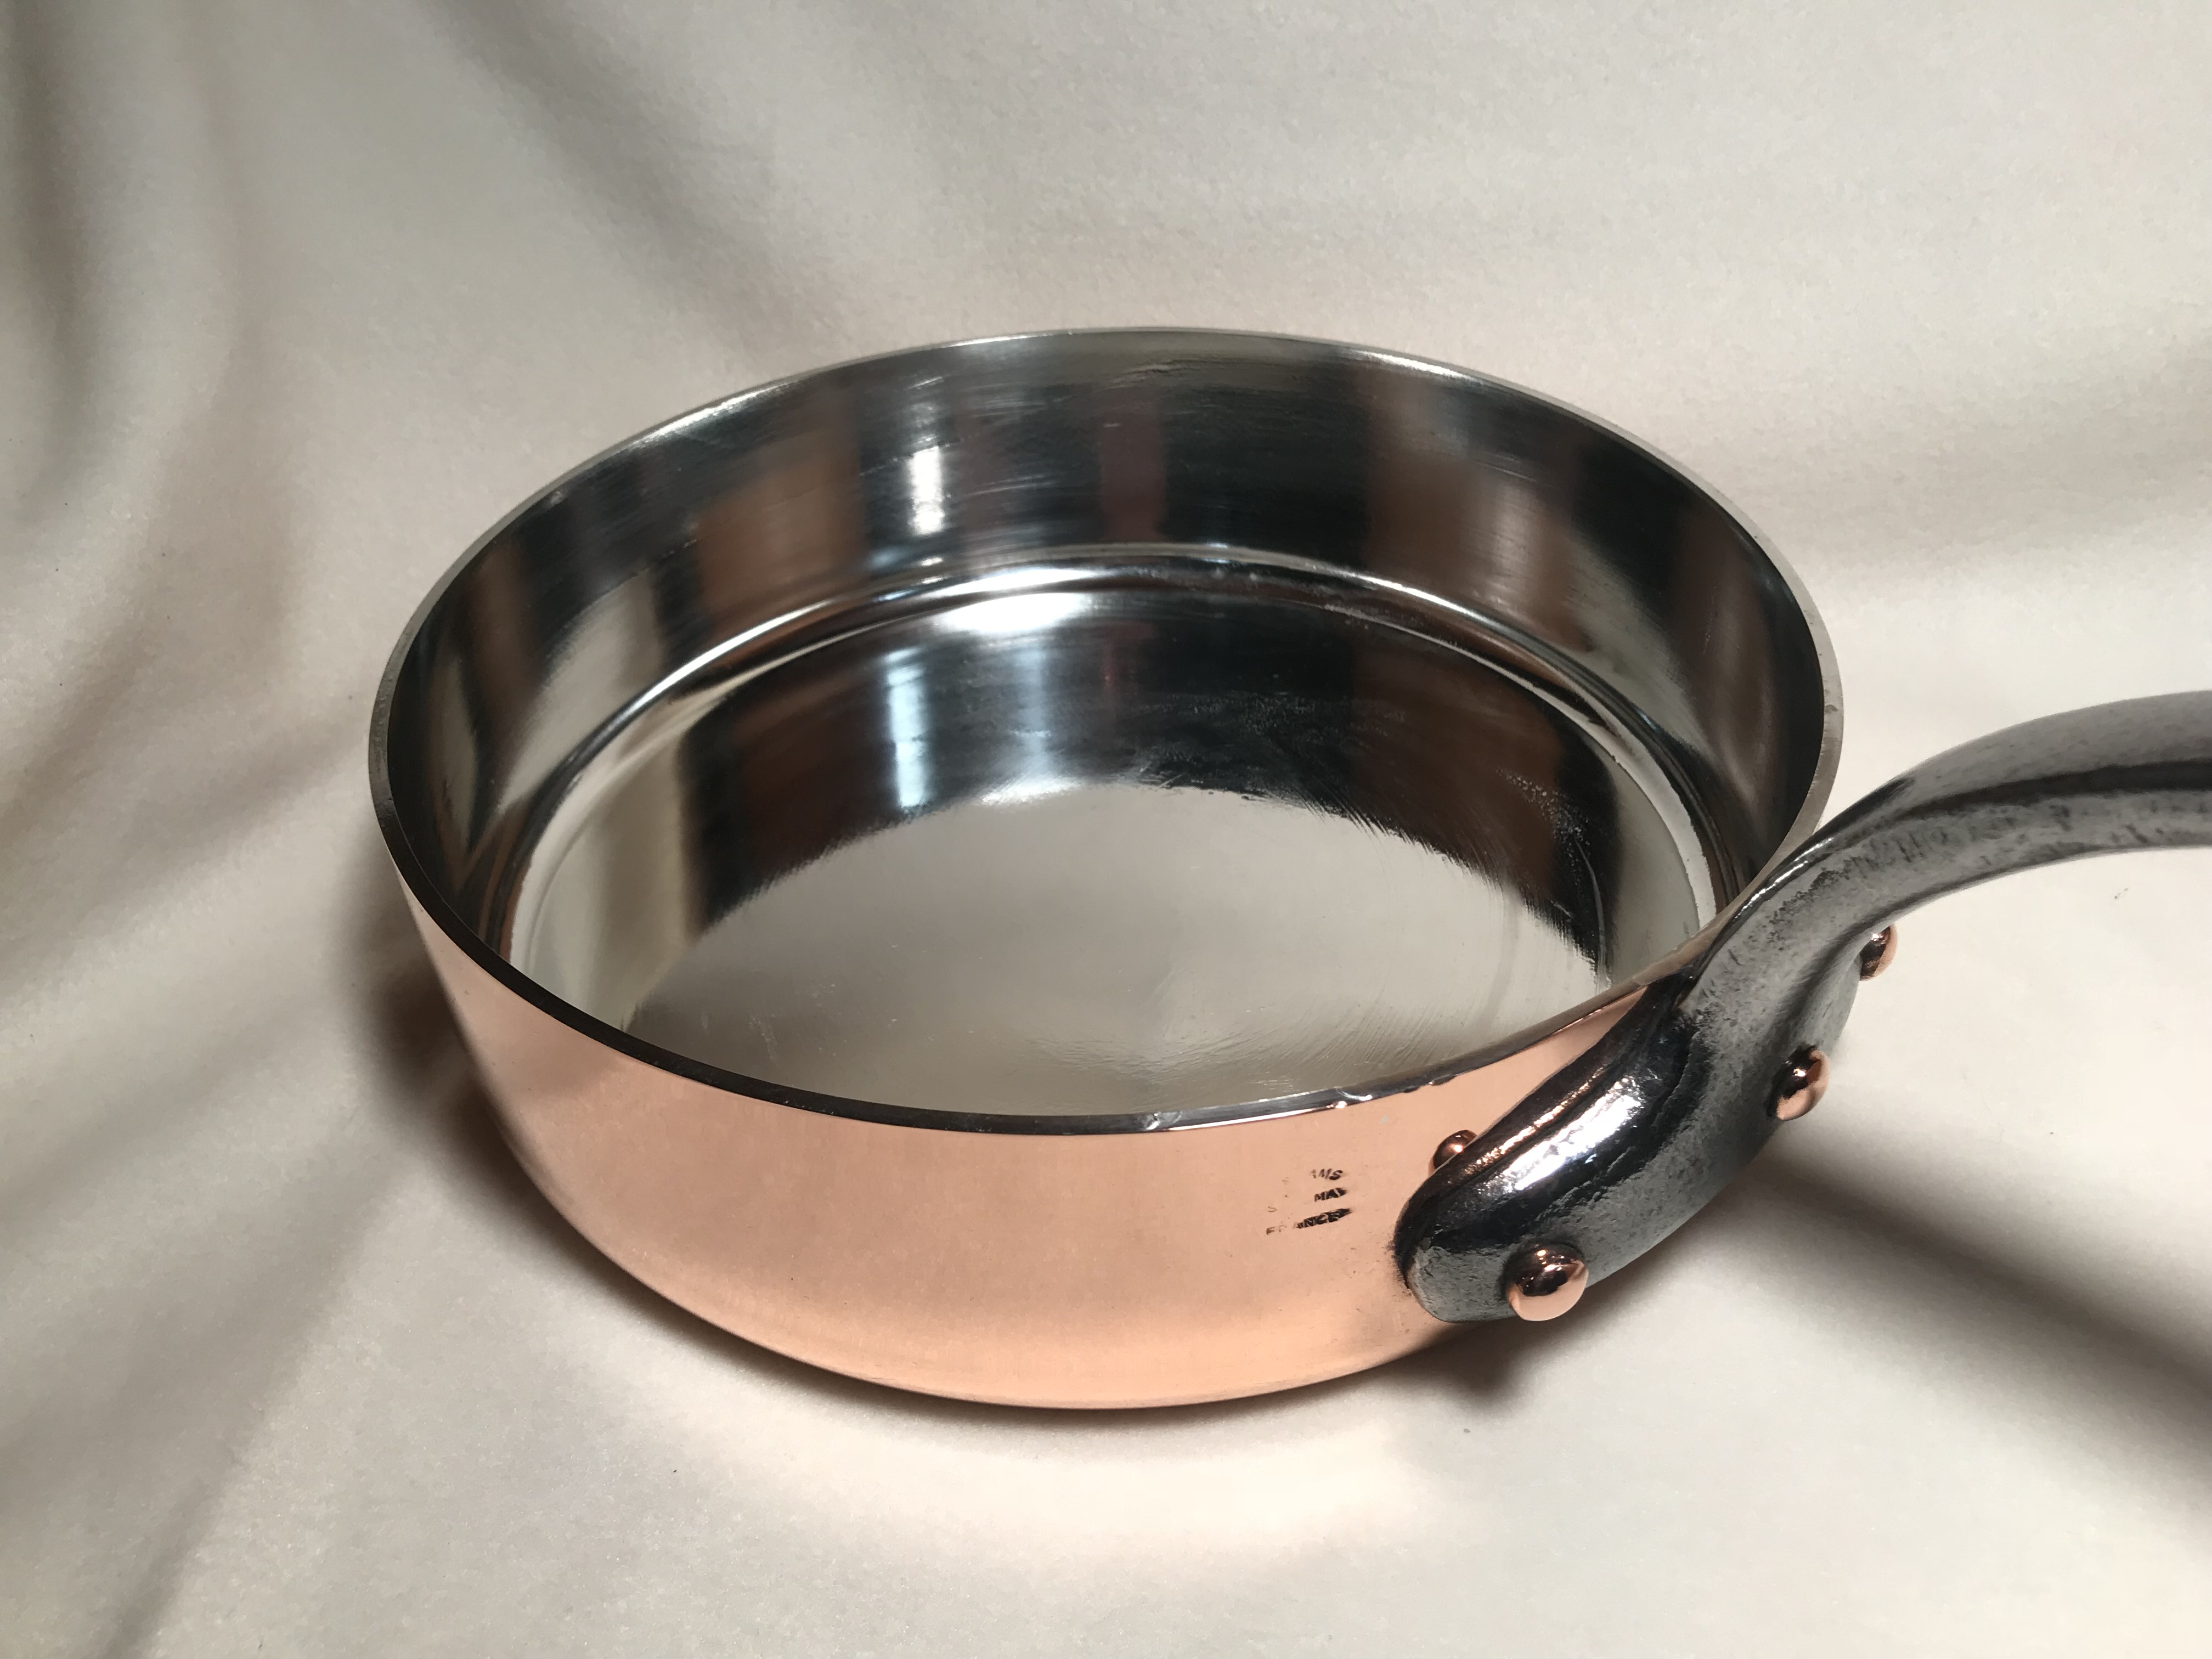 A Nice Large French Copper Fish Pan Saute Pan Stamped E Dehillerin / Made  in France Tin Lined With Bronze Handle Nice in A Country Kitchen 